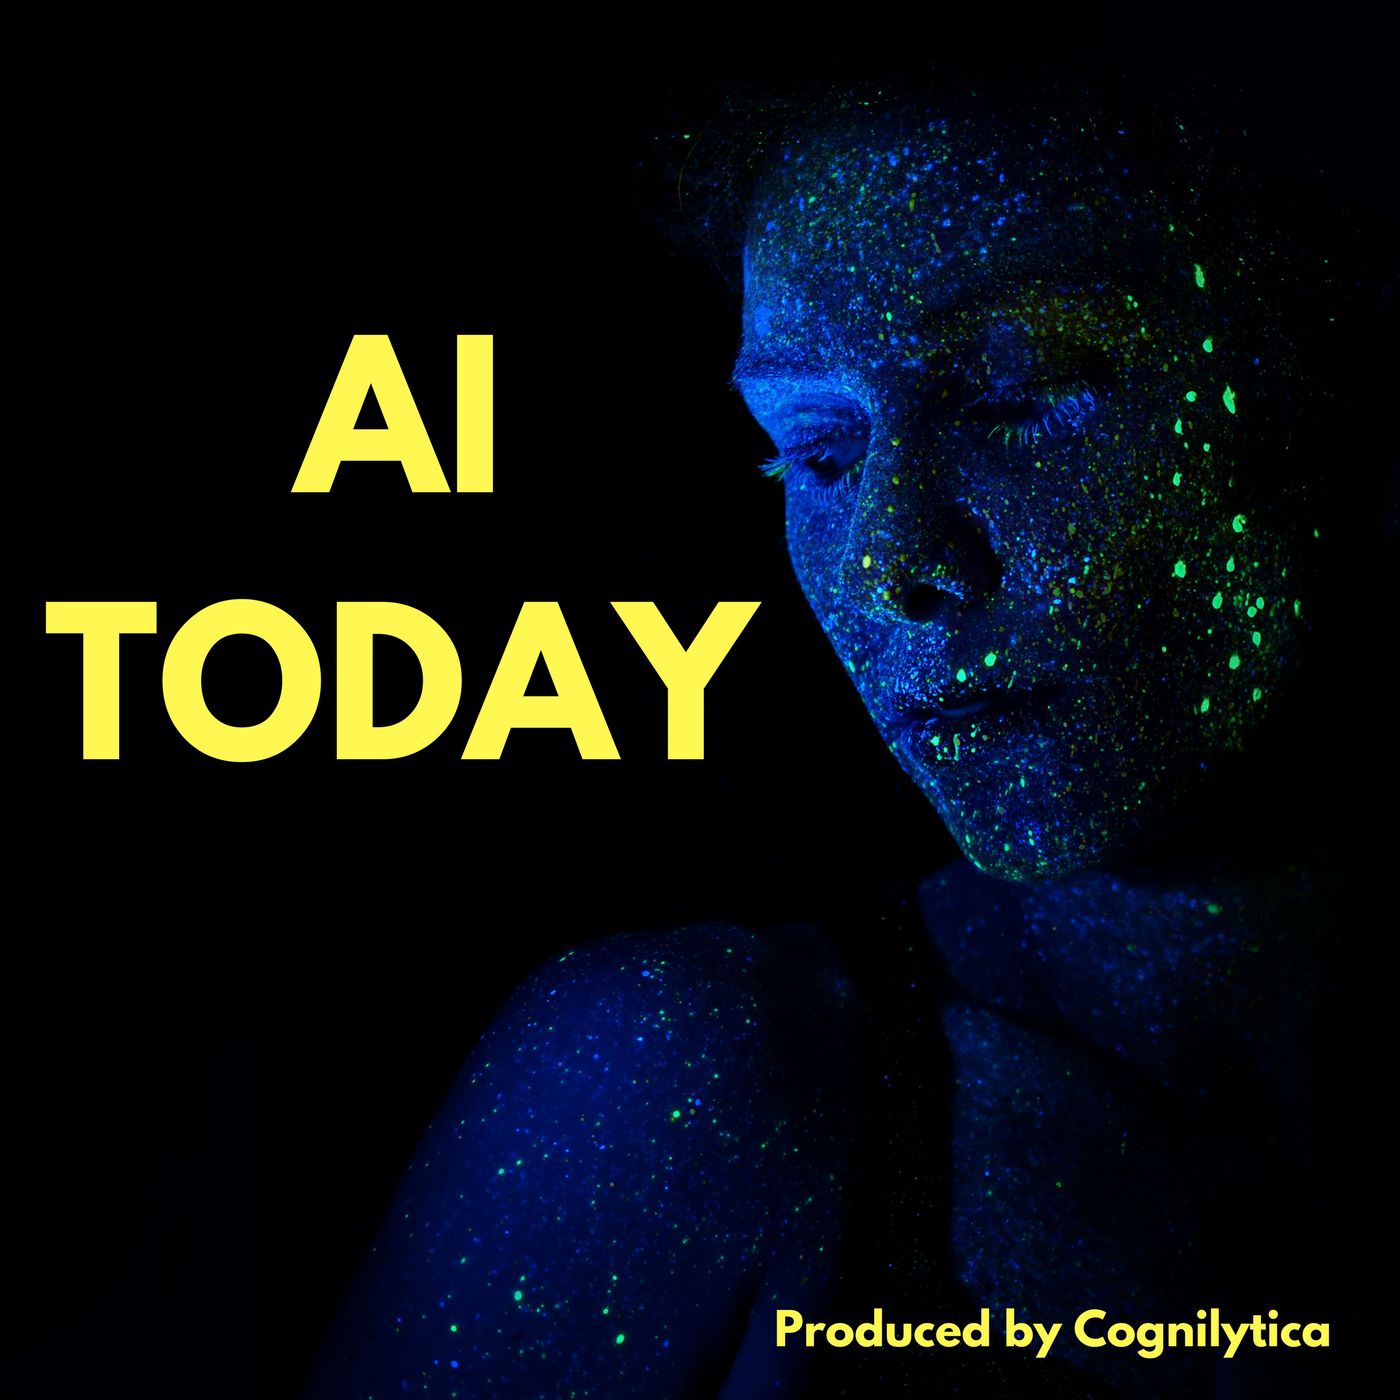 A highlight from AI Today Podcast: Interview with Andy Ilachinski and David Broyles, hosts of the AI with AI podcast